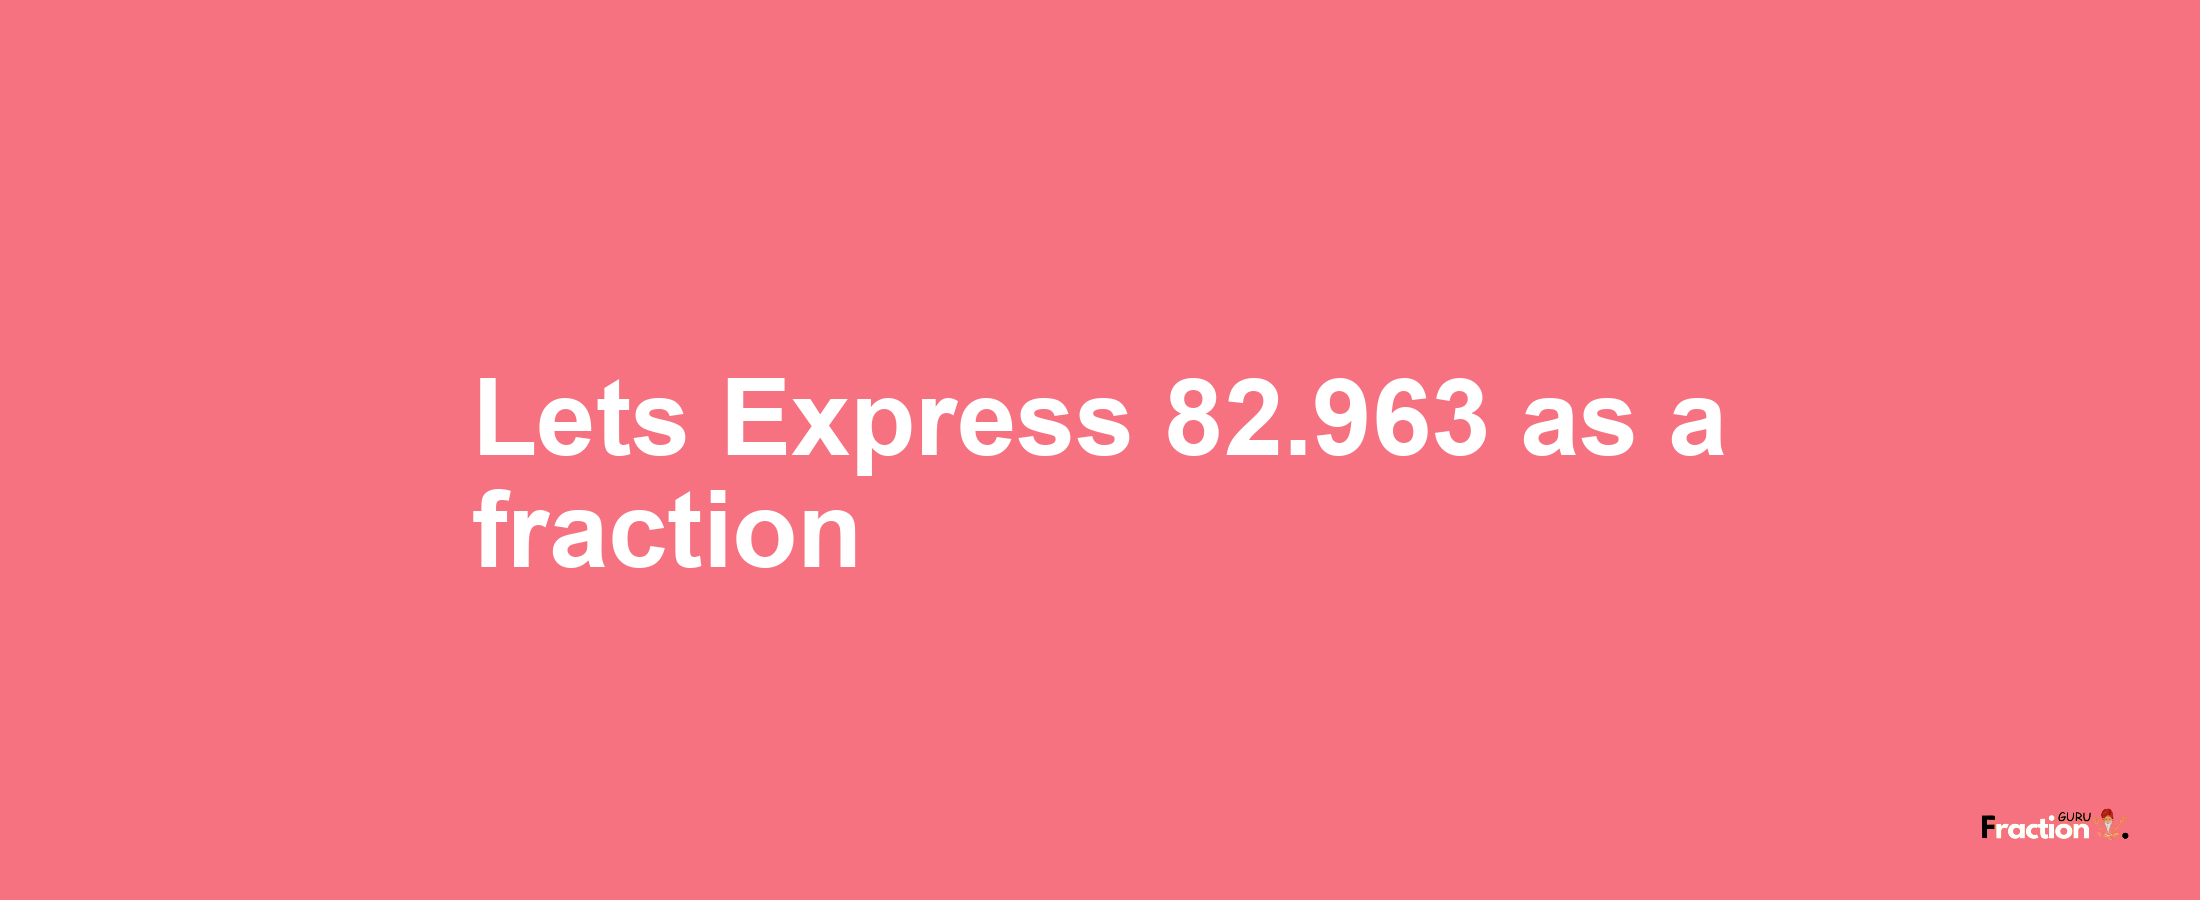 Lets Express 82.963 as afraction